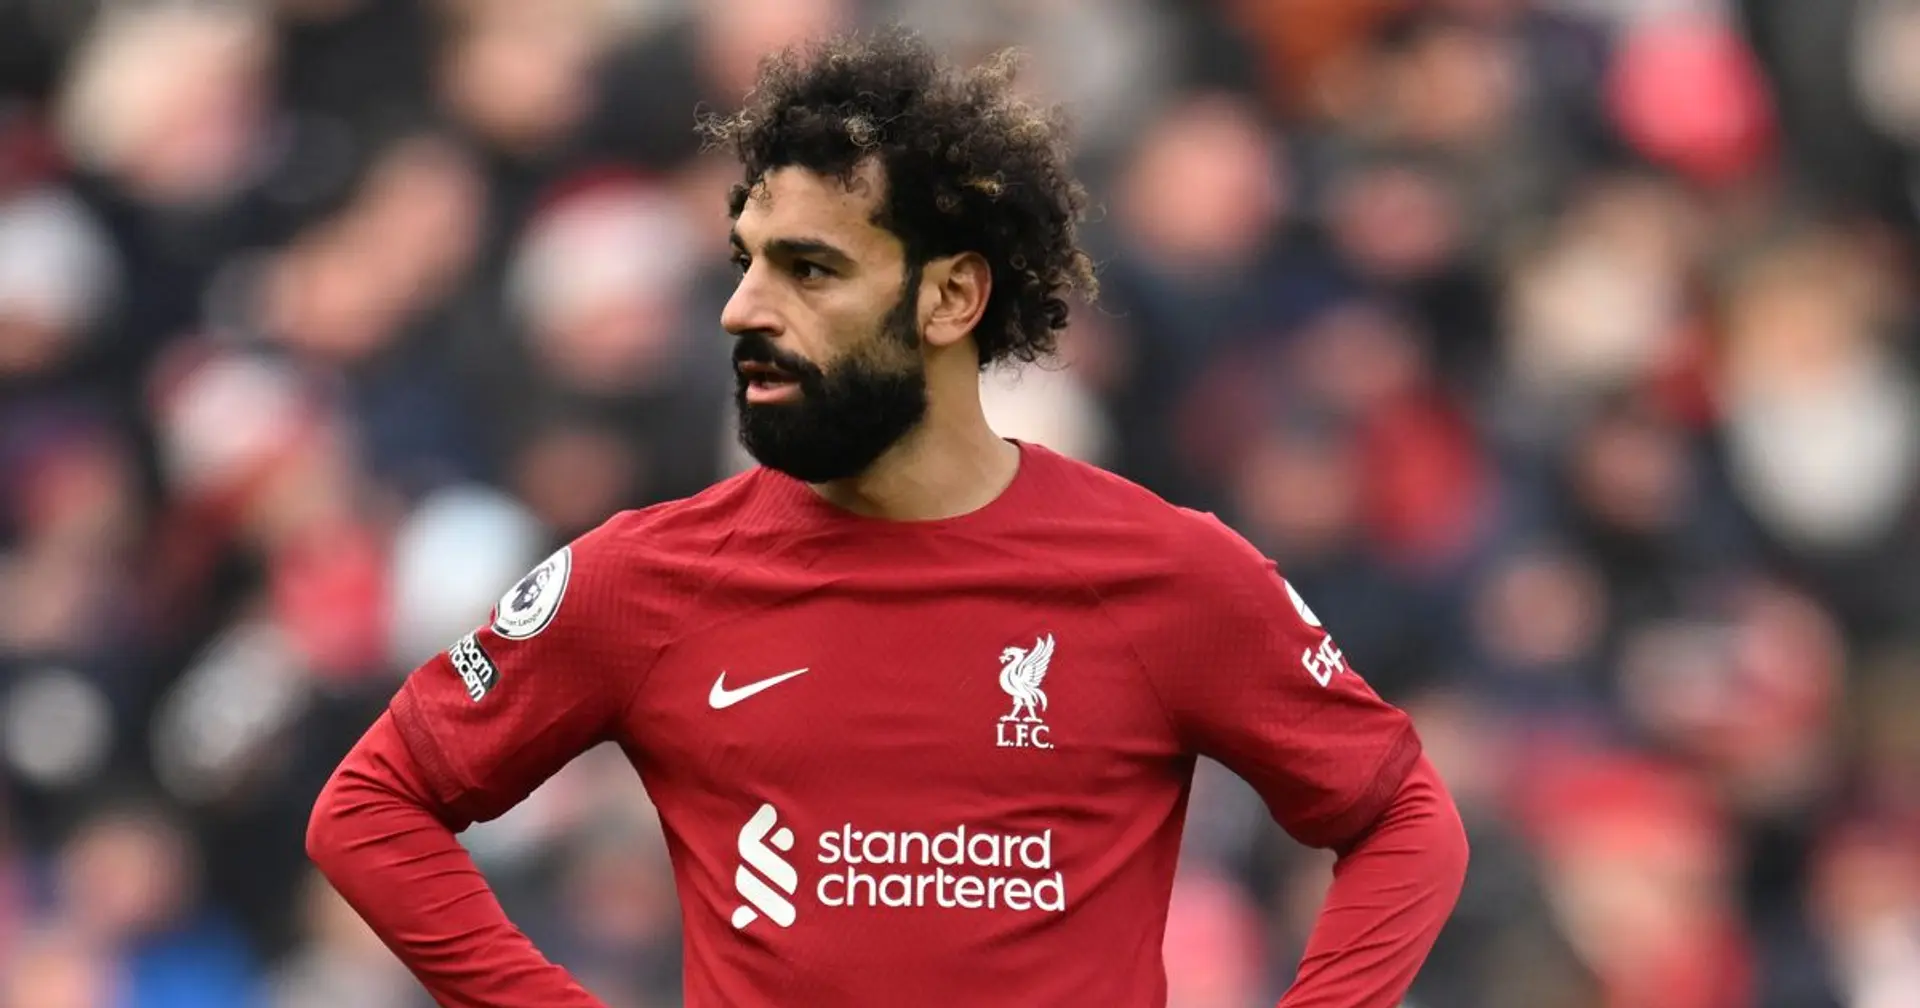 'His presence is lacking', 'still better than most': fans discuss Mo Salah's form